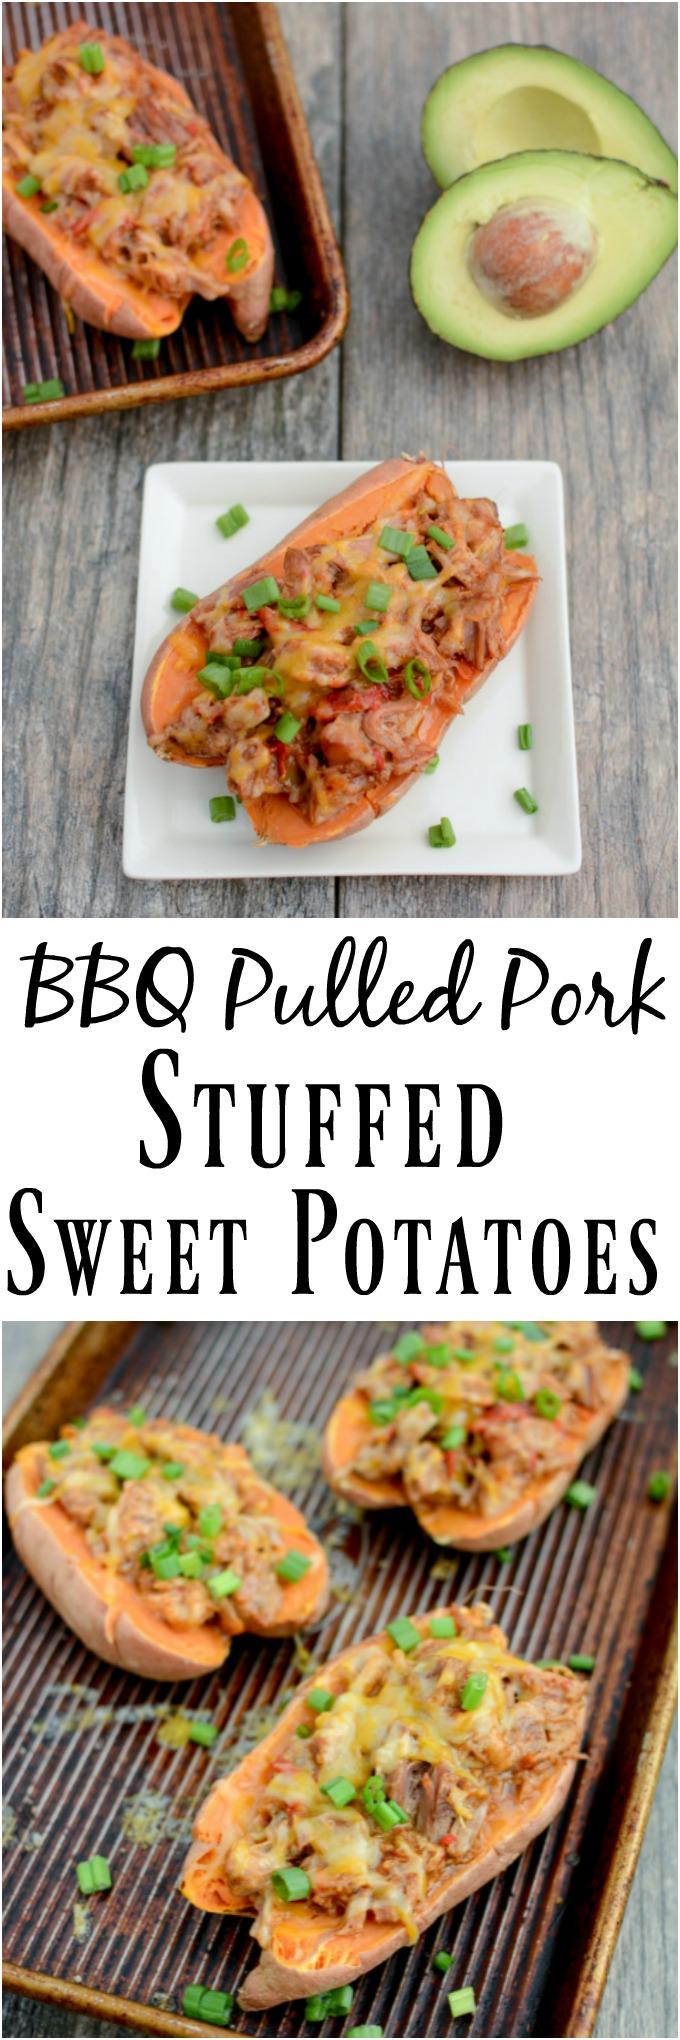 These BBQ Pulled Pork Stuffed Sweet Potatoes are perfect for food prep. Make a big batch of pulled pork and sweet potatoes, stuff them ahead of time and reheat to eat for lunch or dinner.